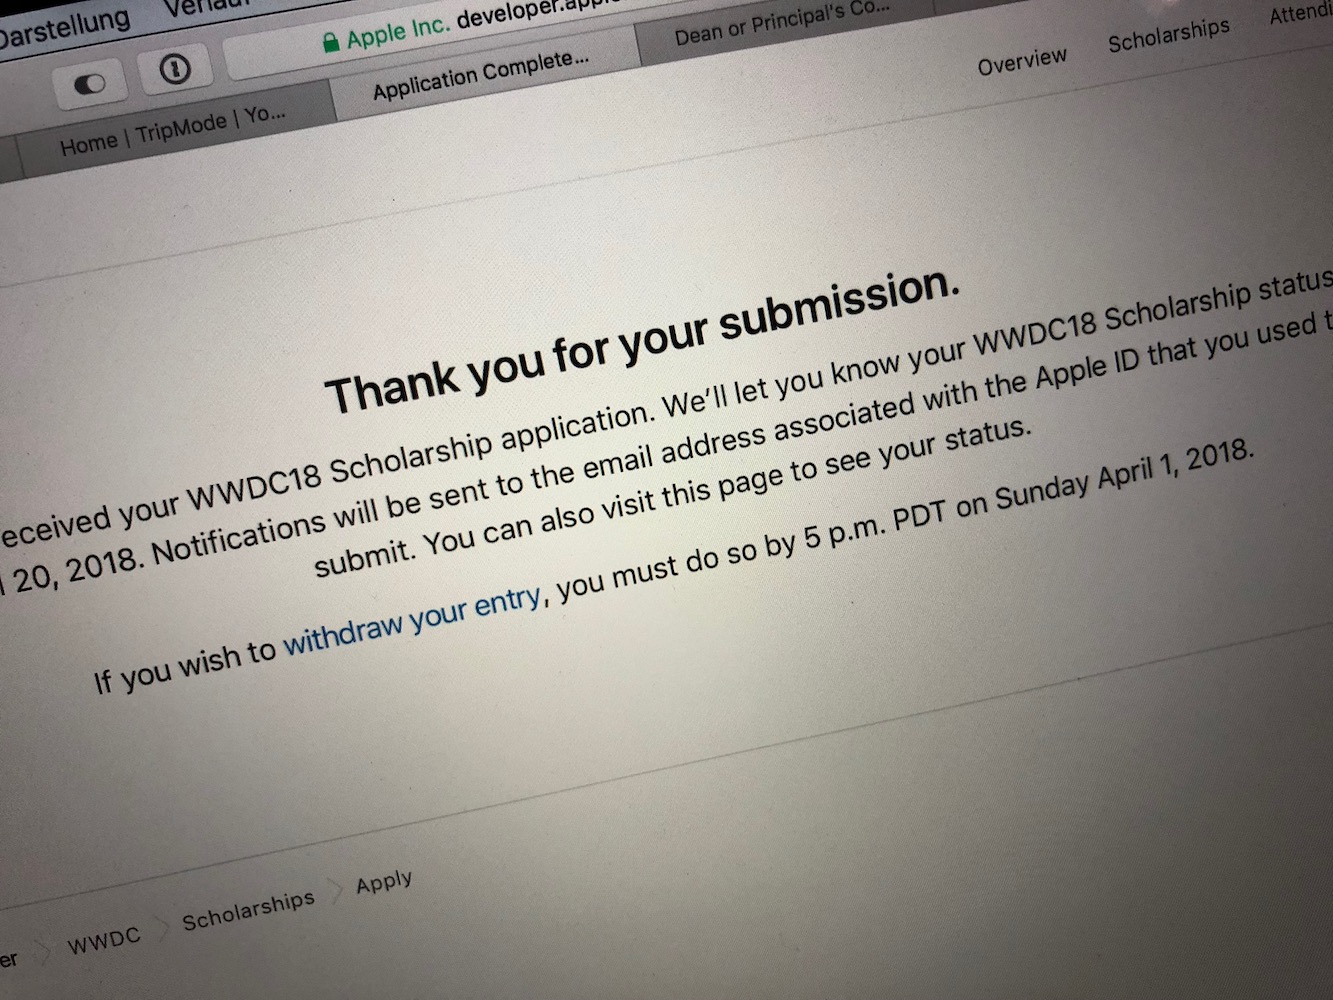 image of the apple page that says "thank you for your submission"